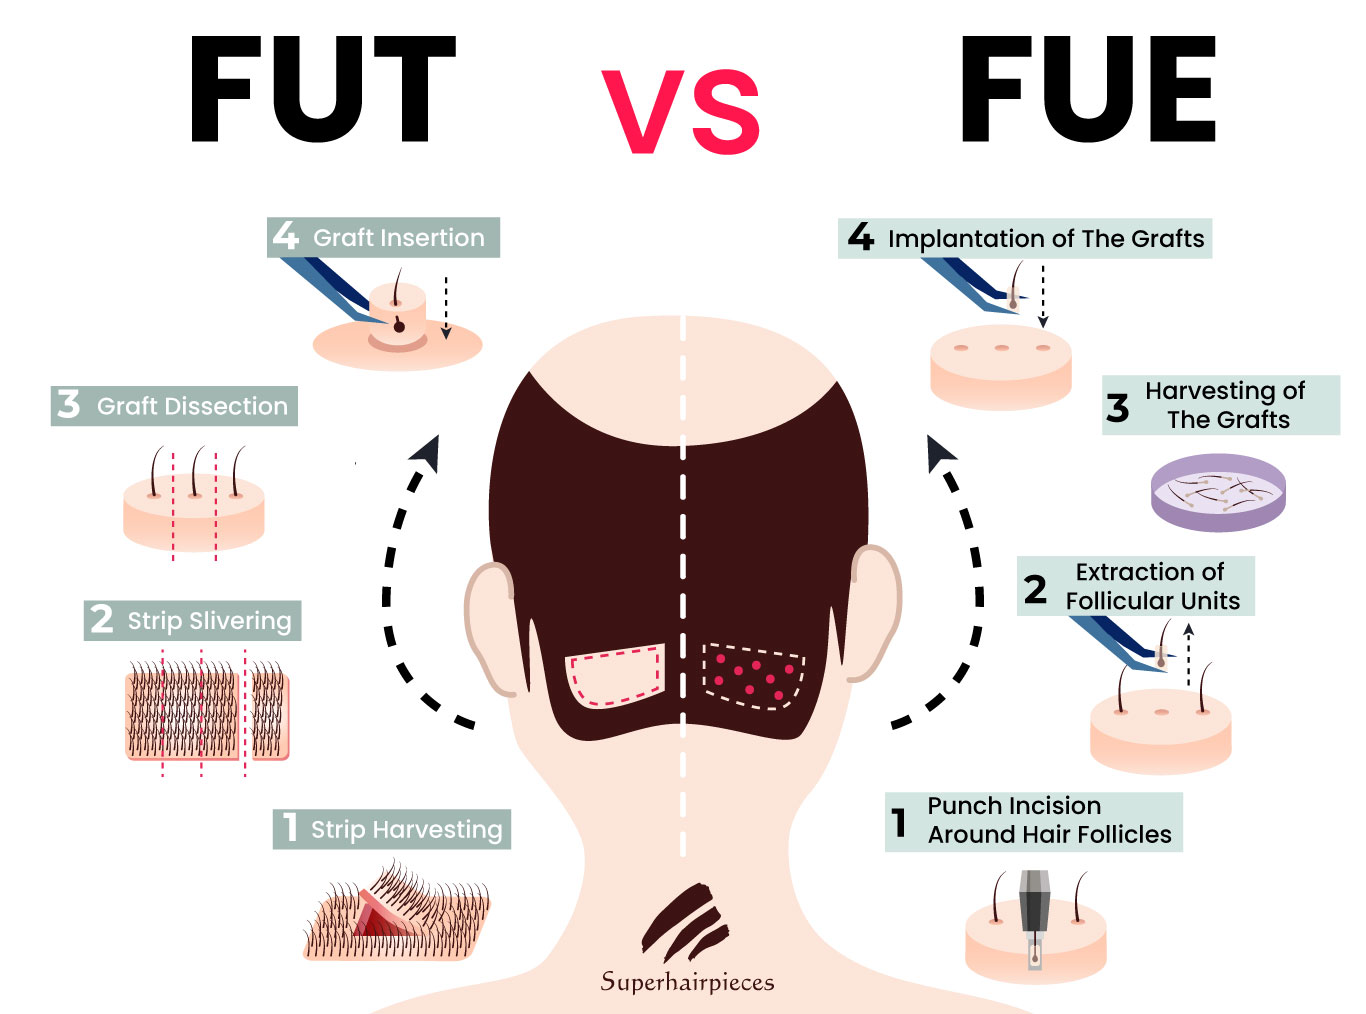 two different hair transplant procedures FUE and FUT